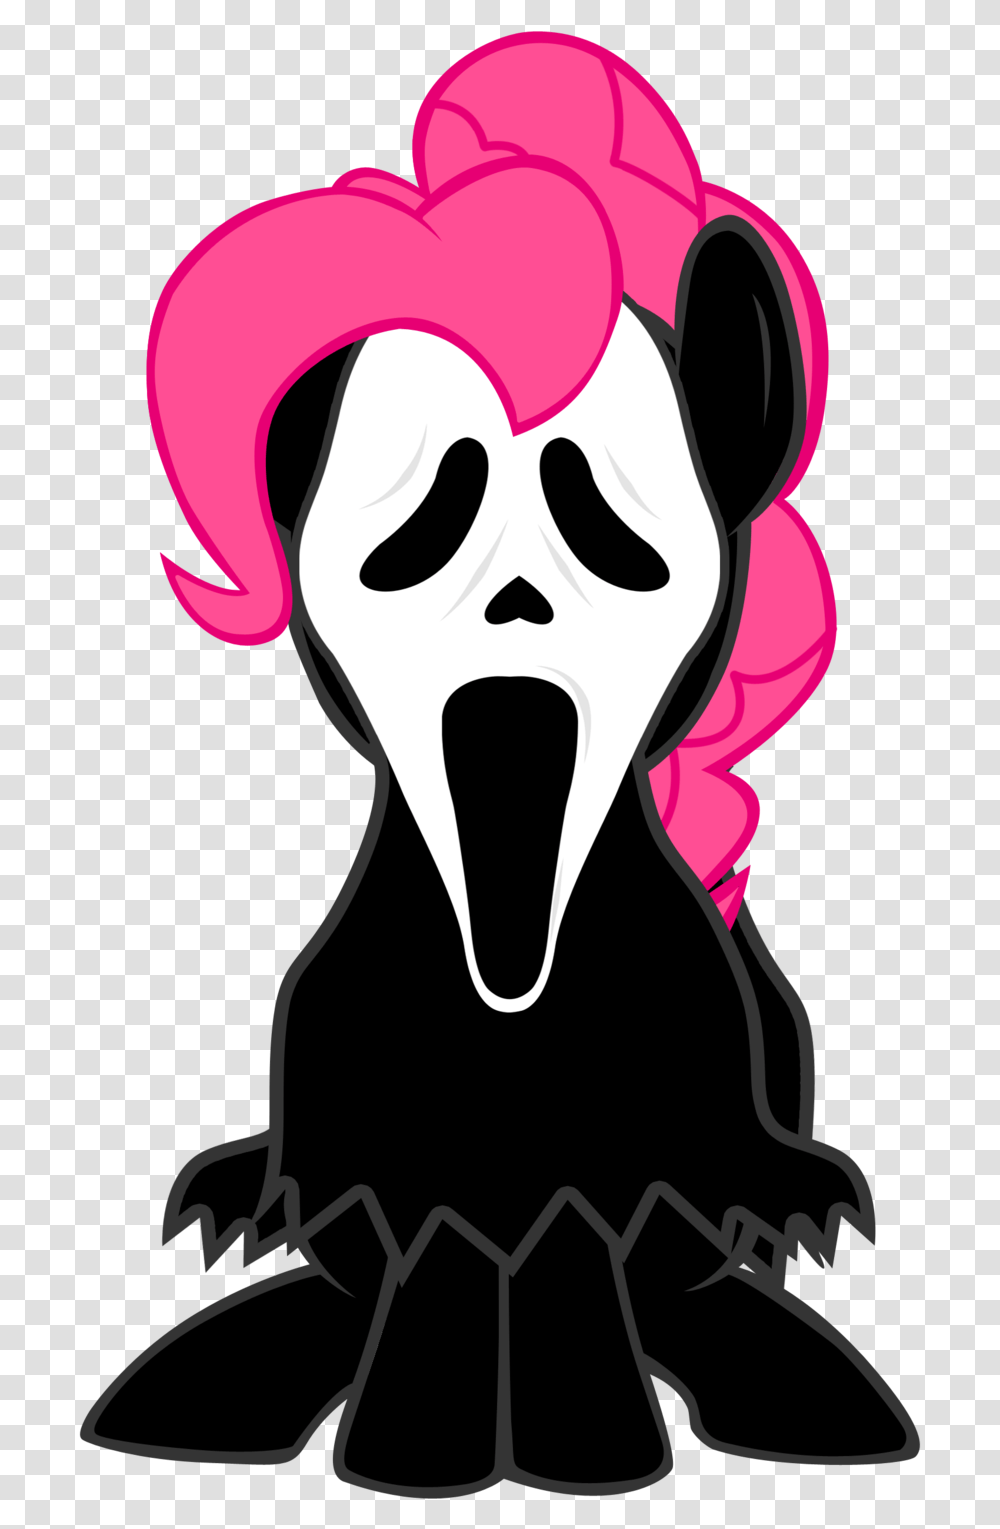 Scary Mlp Pinkie Pie Scary Ghost Face Cartoon, Stencil, Halloween, Graphics, Mask Transparent Png